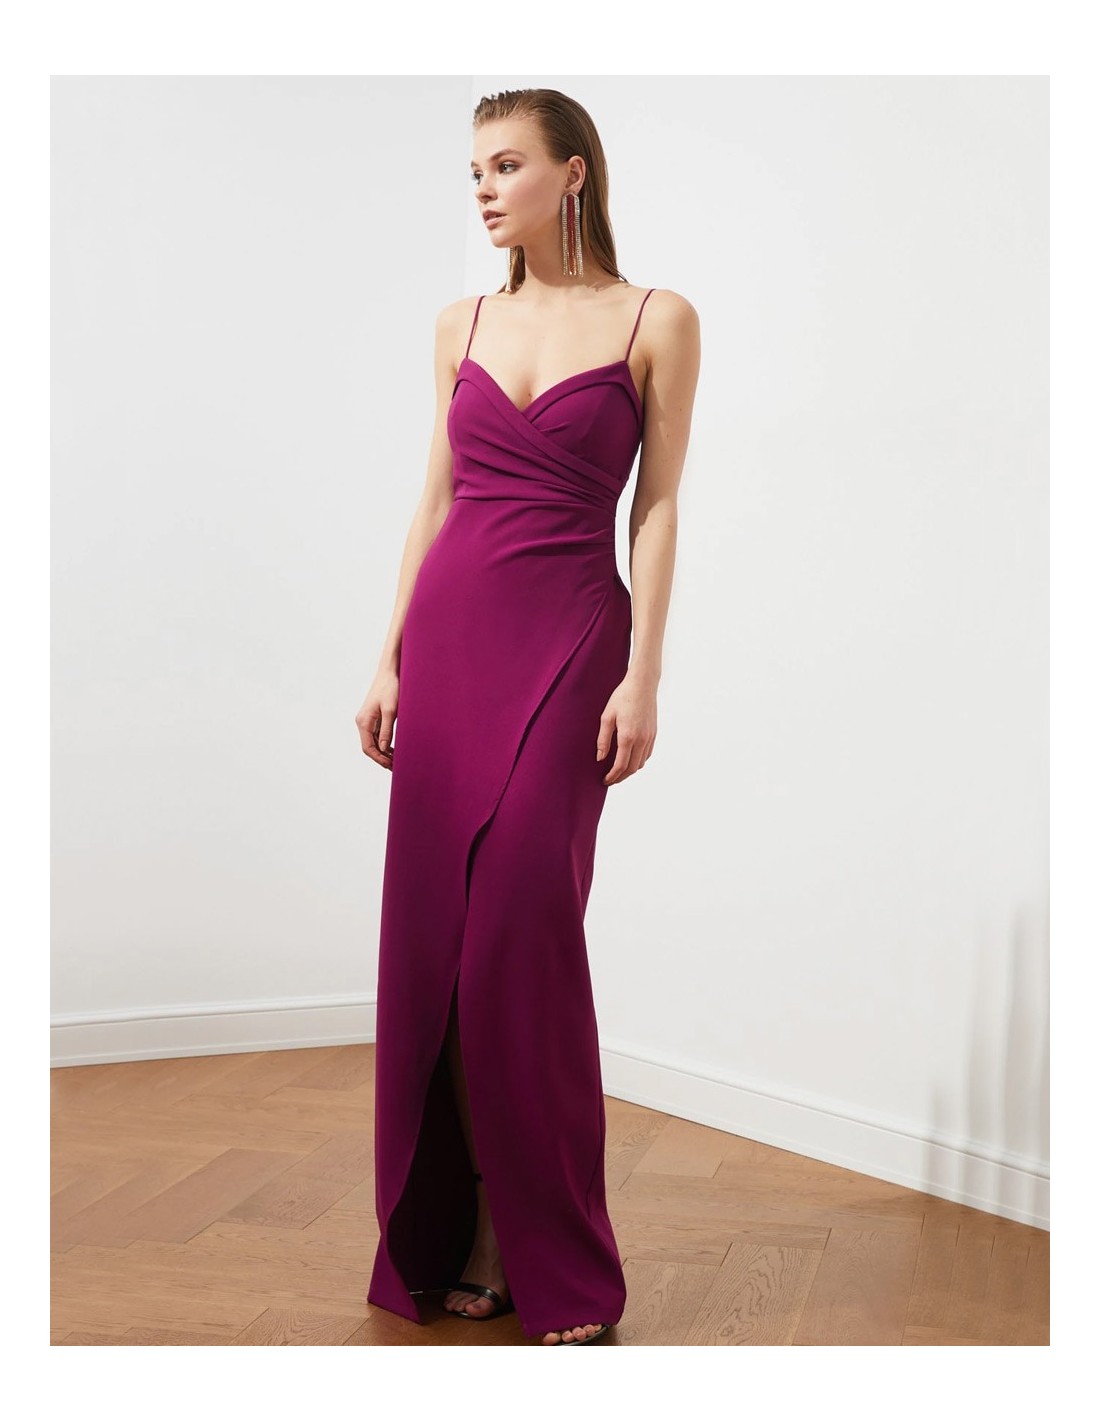 A beautiful and elegant dress, available in ash blue and burgundy. This dress has a stunning central slit that gives it movement and will make you look like no one else your accessories.